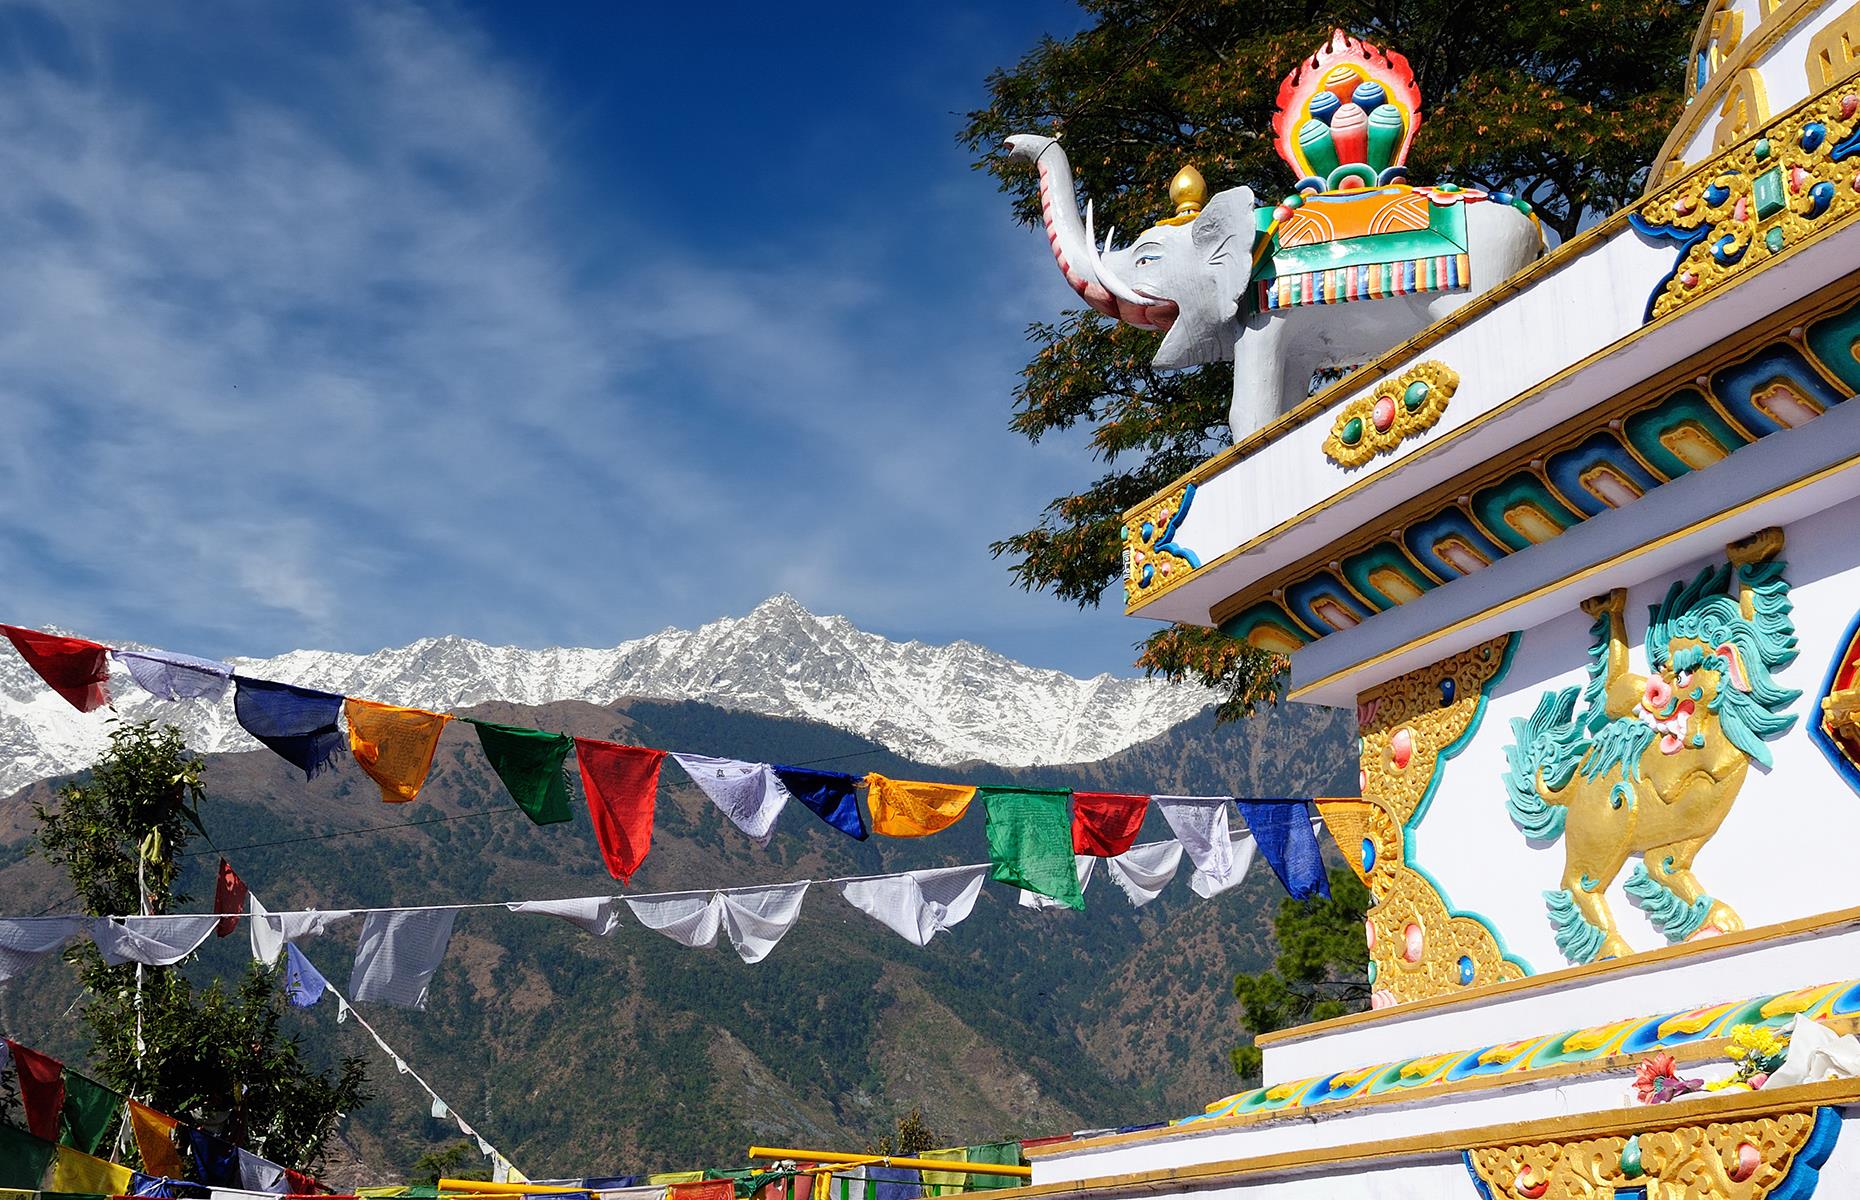 Surrounded by forested hills, this is the mountain home of the Dalai Lama and the exiled Tibetan government. Try trekking in the Dhauladhar mountains, take meditation and yoga classes here, or just mill about town soaking up the serenity of being surrounded by temples where red-robed monks and nuns reside.